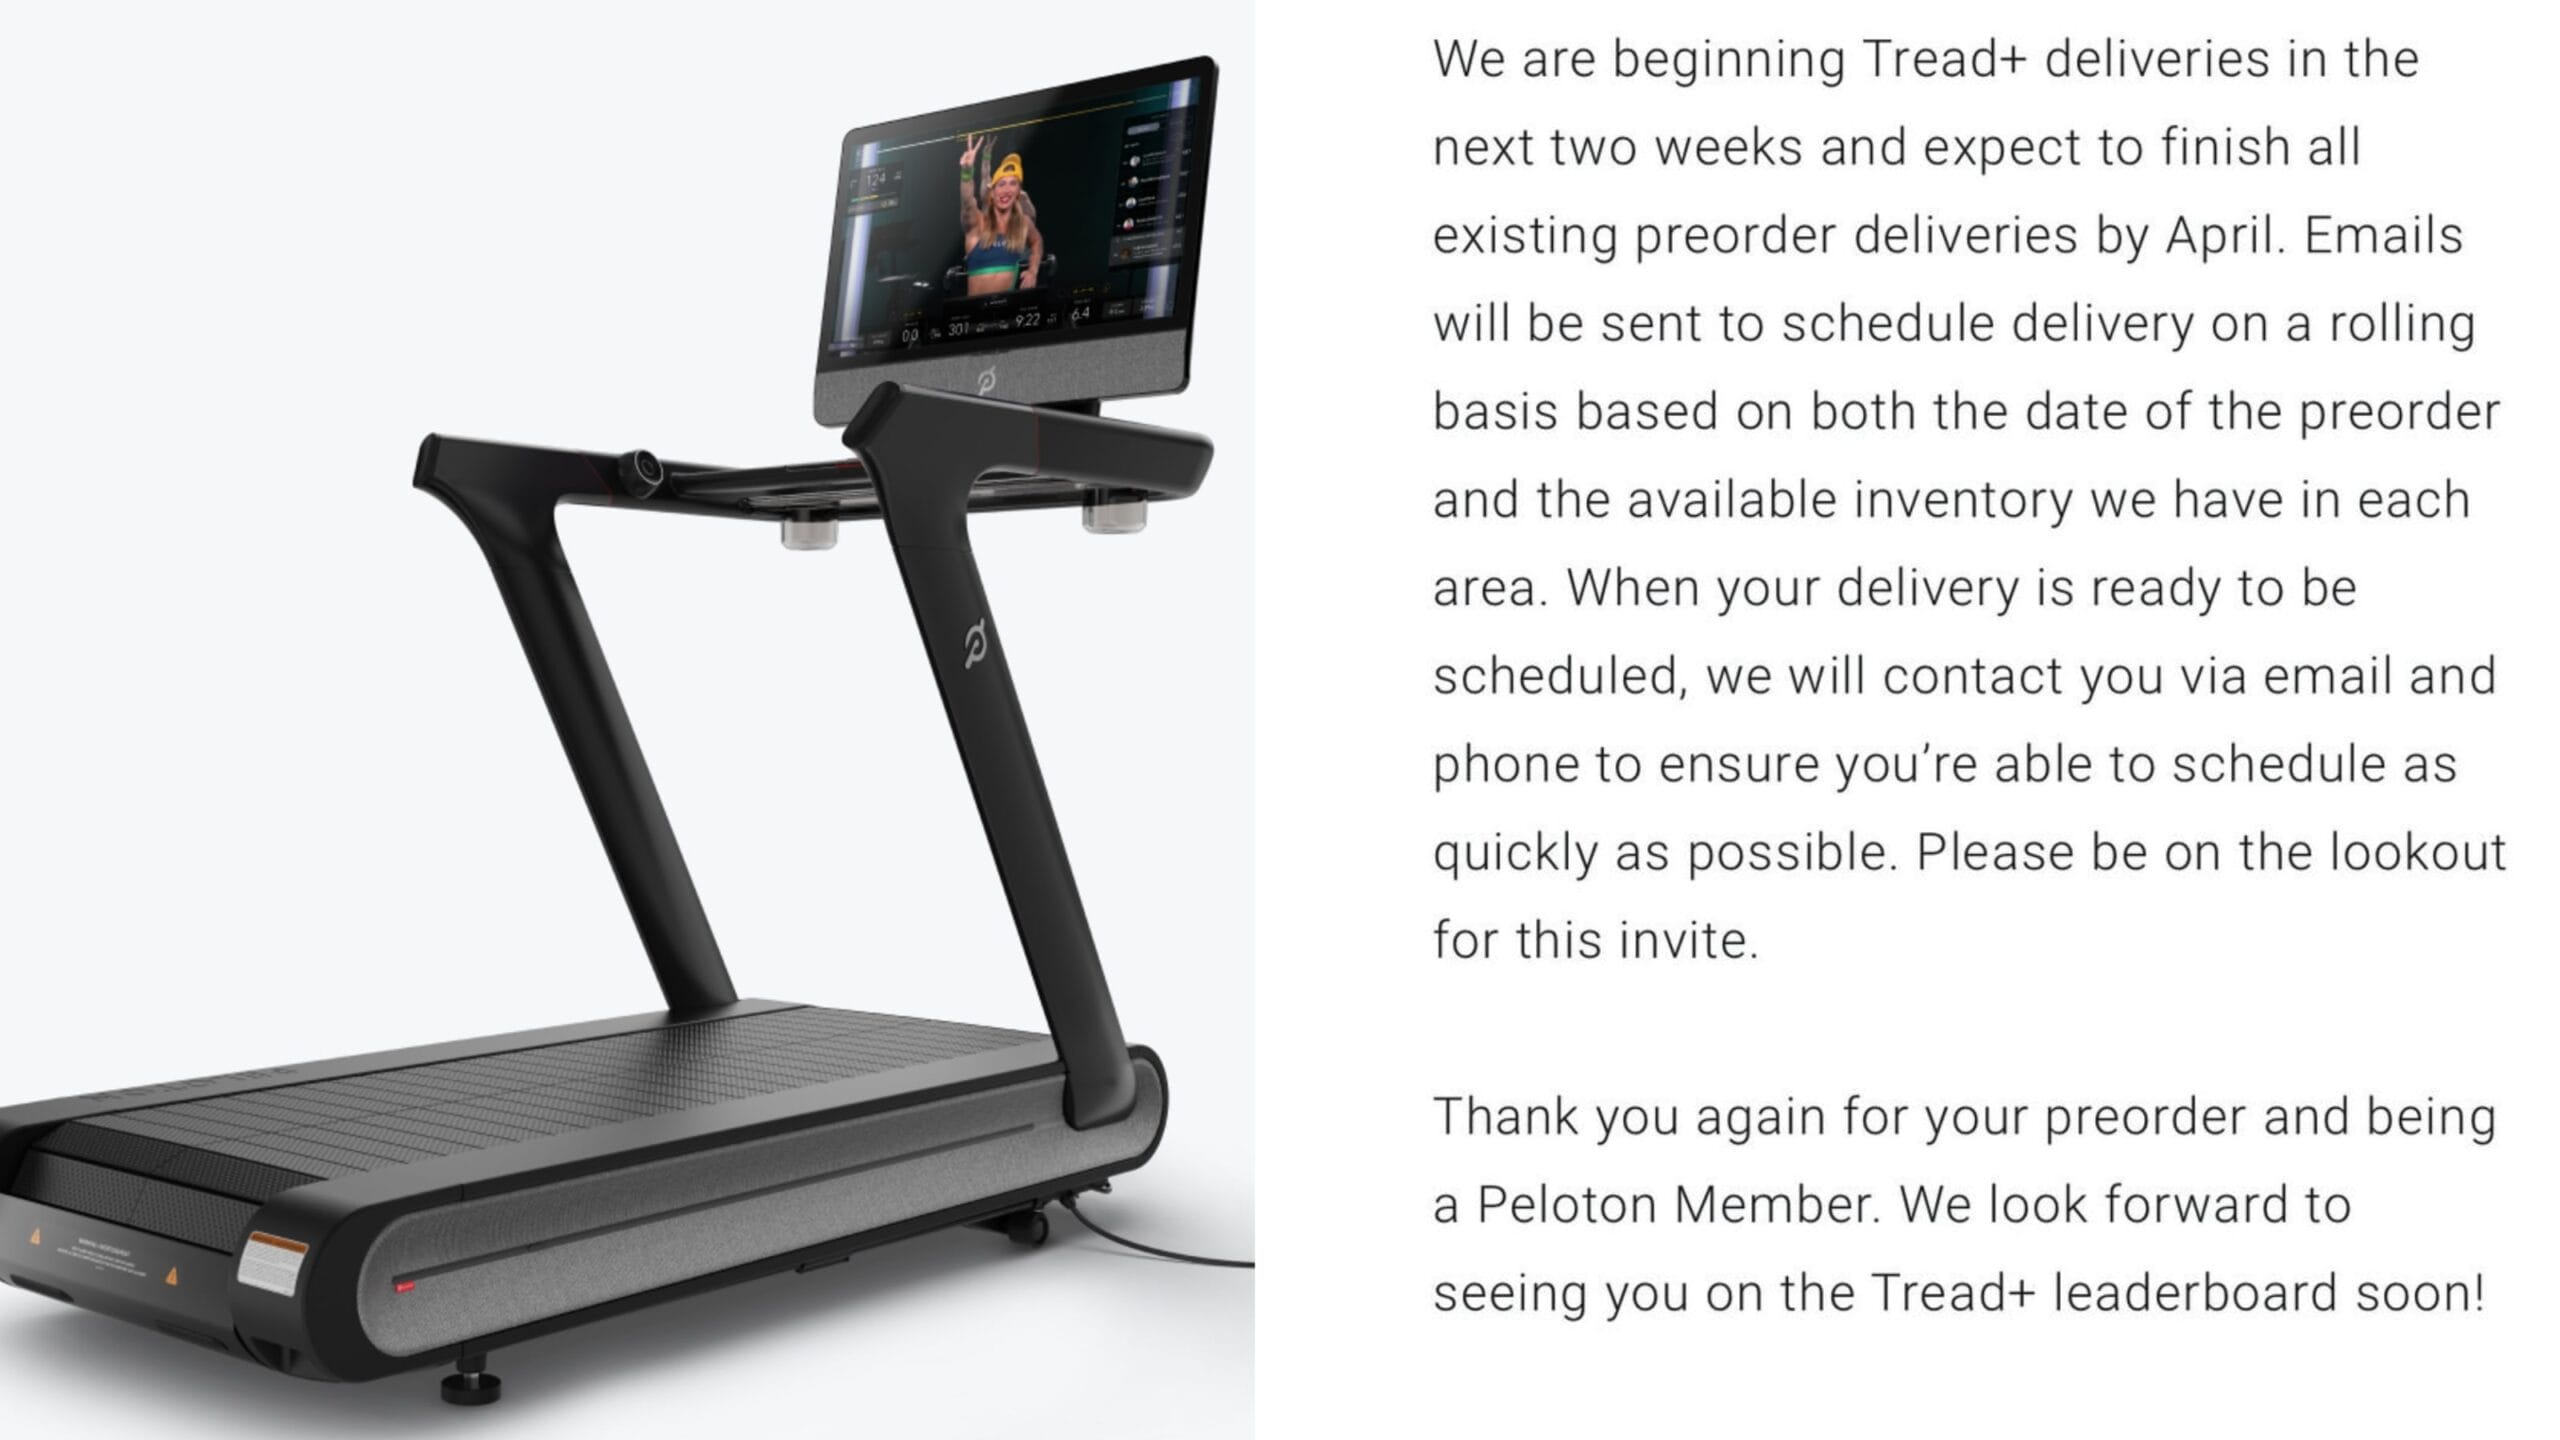 Image of Tread+ next to screenshot of update email from Peloton about Tread+ delivery dates.